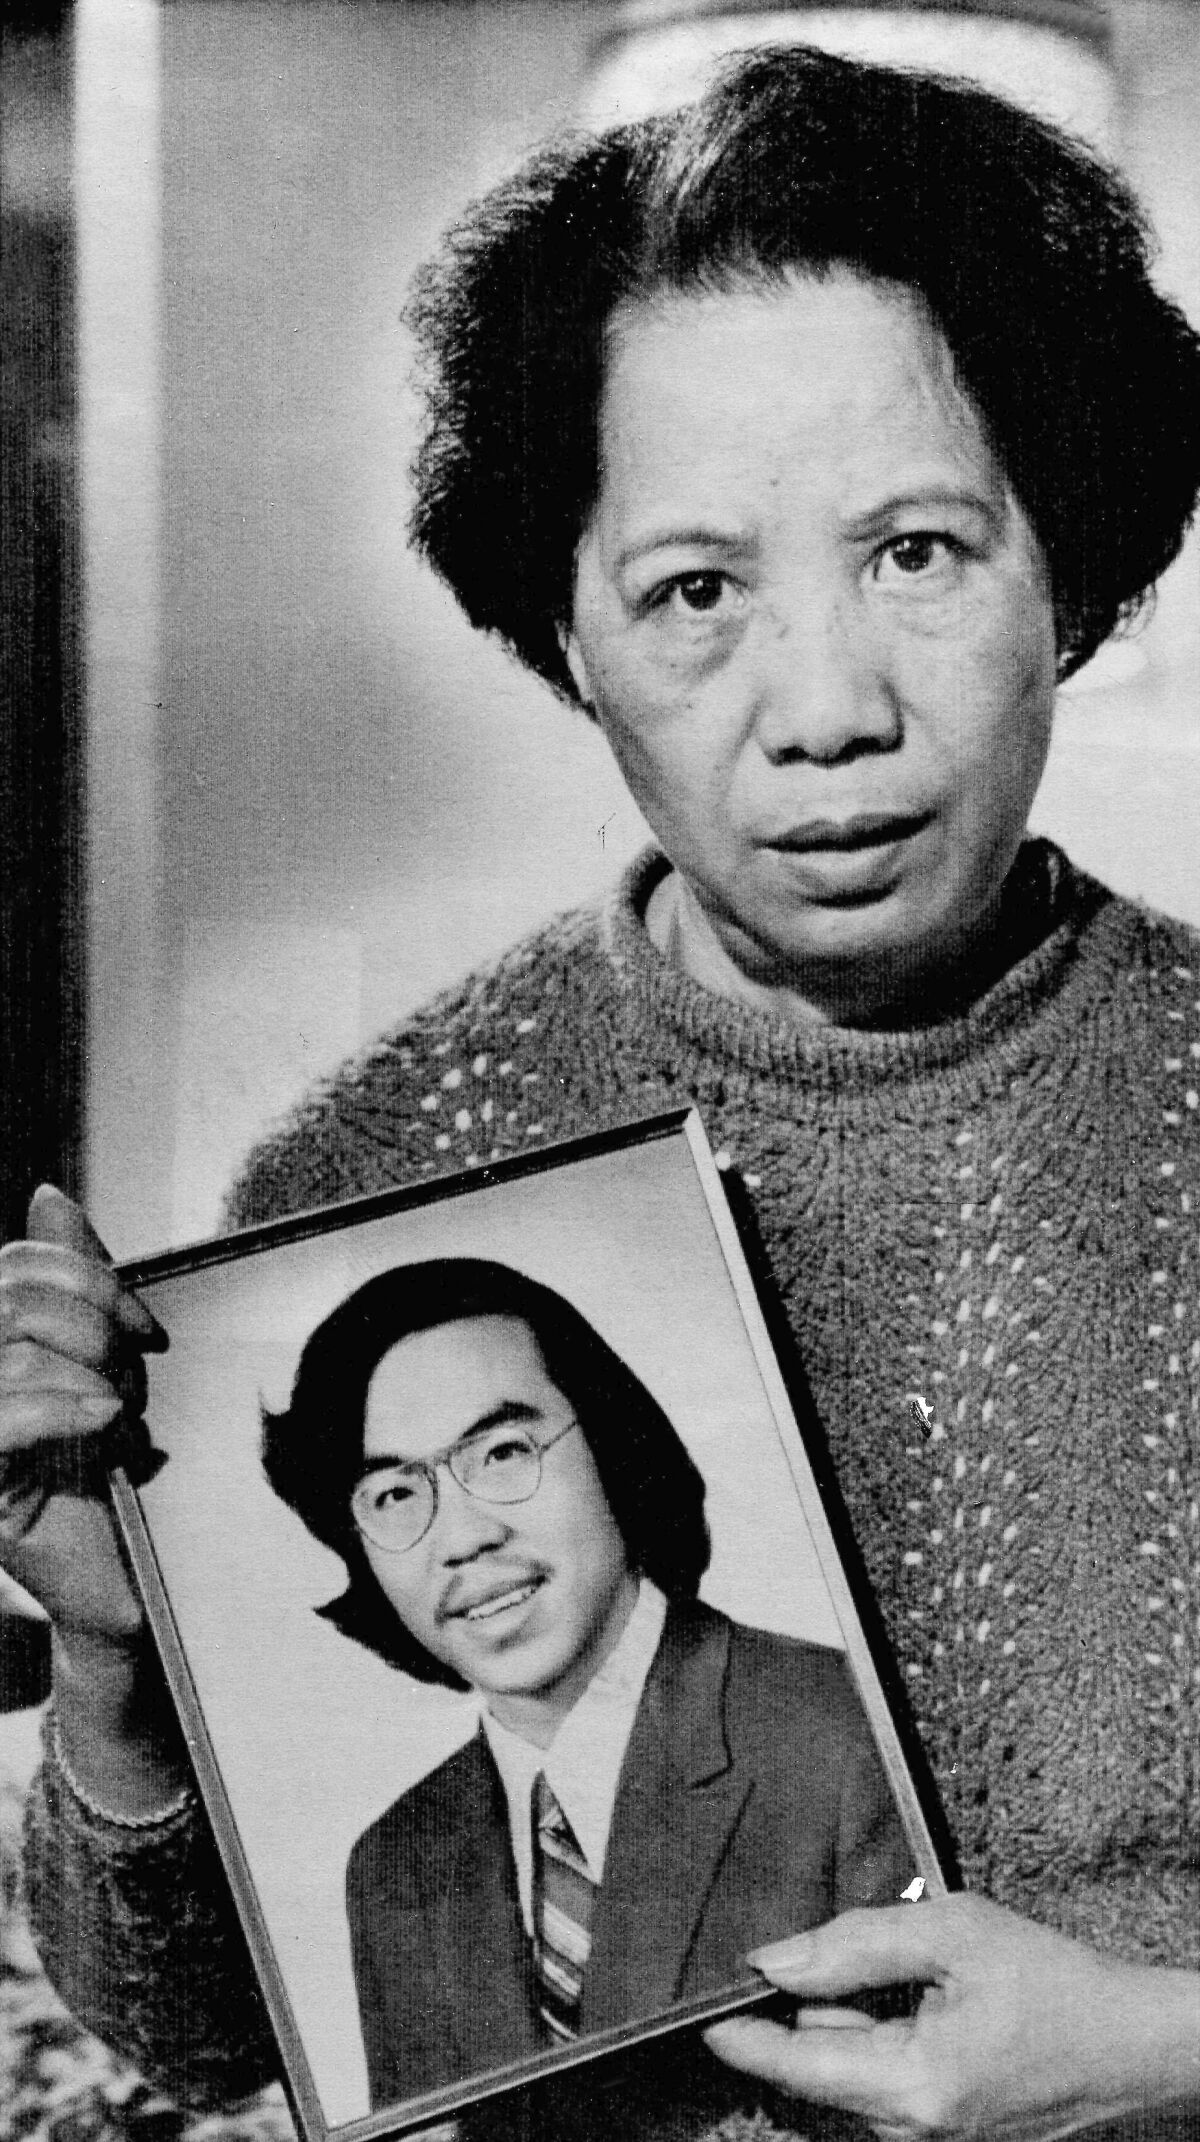 FILE - In this Nov. 2, 1983, photo, Lily Chin holds a photograph of her son Vincent, 27, who was beaten to death on June 23, 1982. Detroit is helping to honor Vincent Chin, a Chinese American man who was beaten to death 40 years ago by two white men who never served jail time. The Vincent Chin 40th Remembrance & Rededication begins Thursday, June 16, 2022, and focuses on civil rights efforts that started with his 1982 death. (AP Photo/Richard Sheinwald, File)